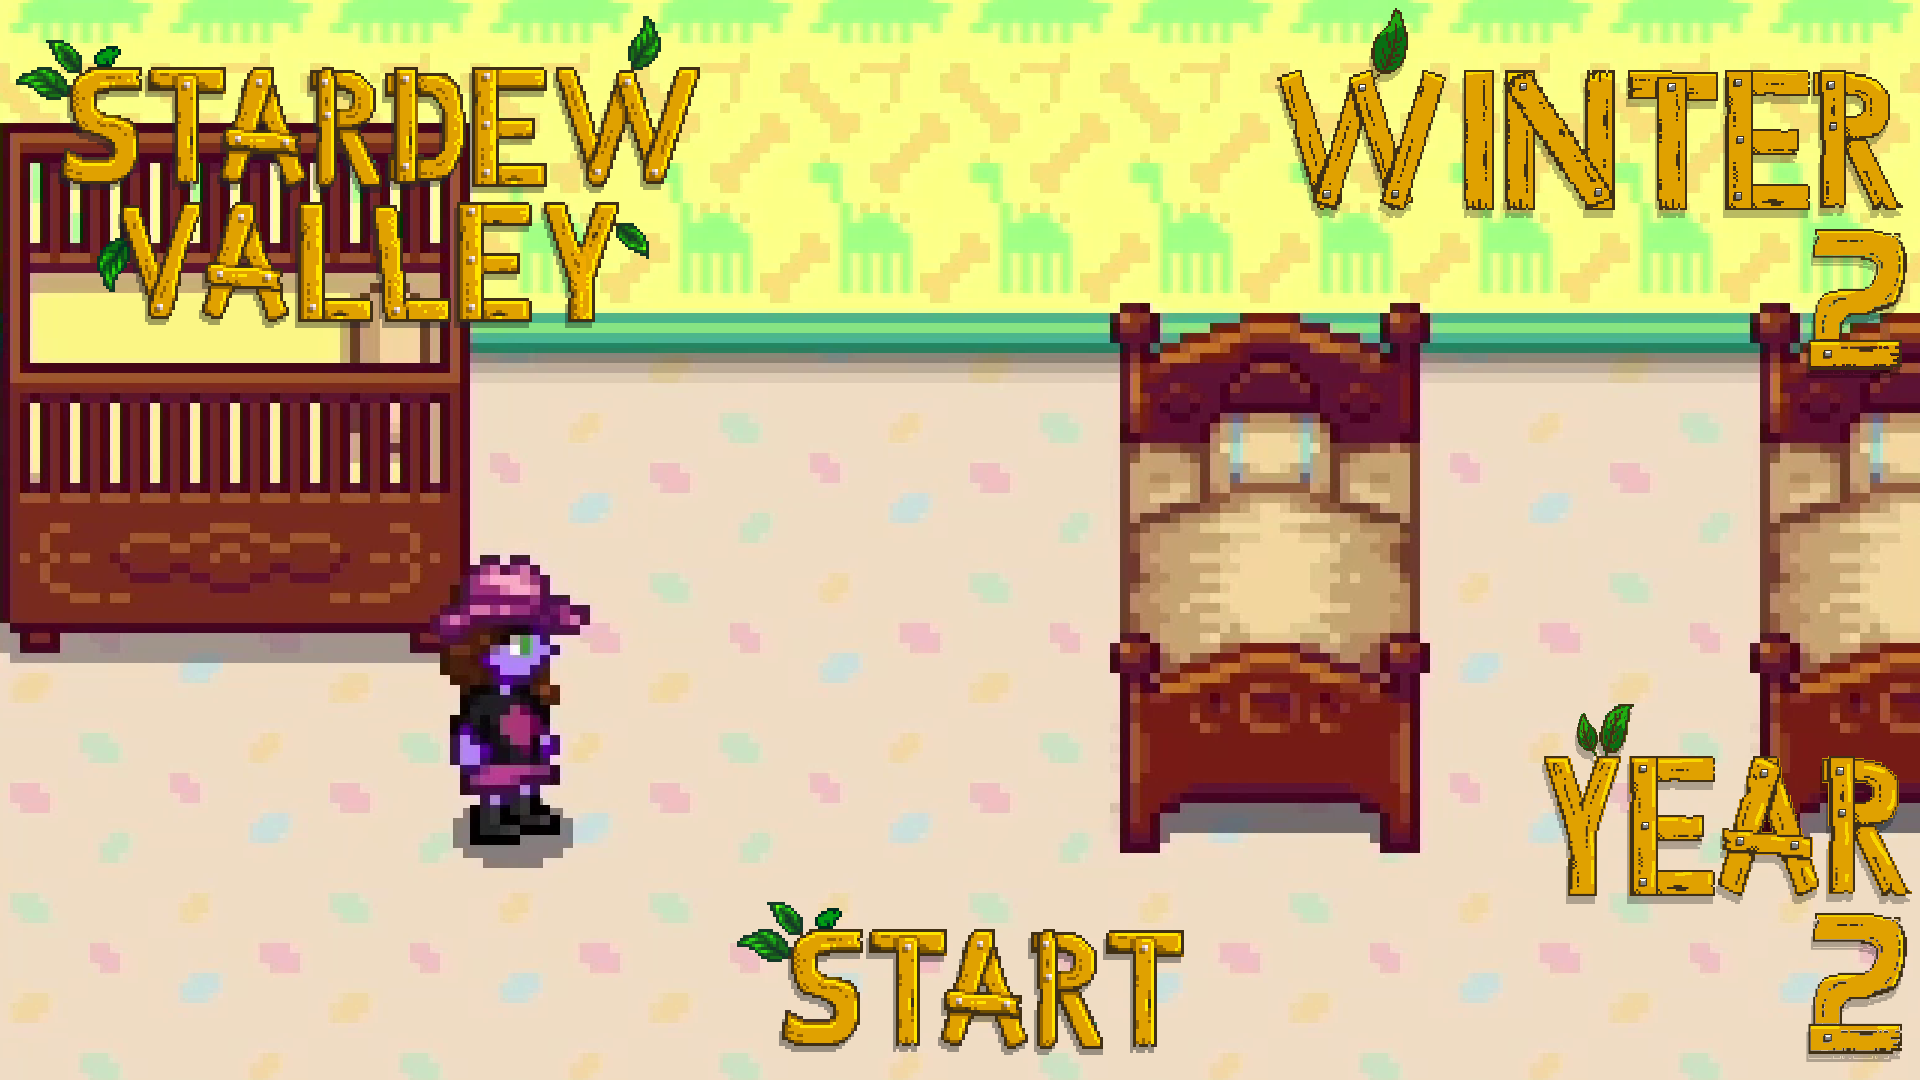 What is There to do But Fish? – Stardew Valley, Winter 2, Year 2, Start